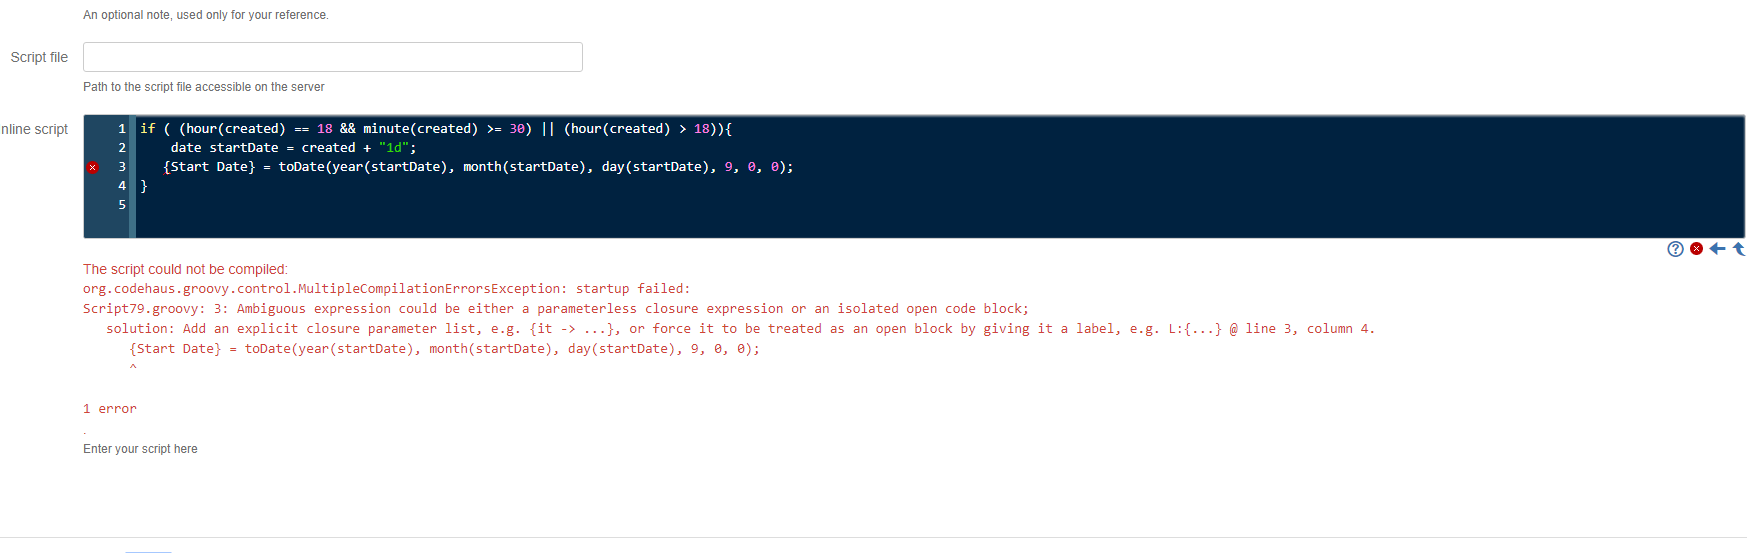 Solved Code::Blocks This is optional, but in operating